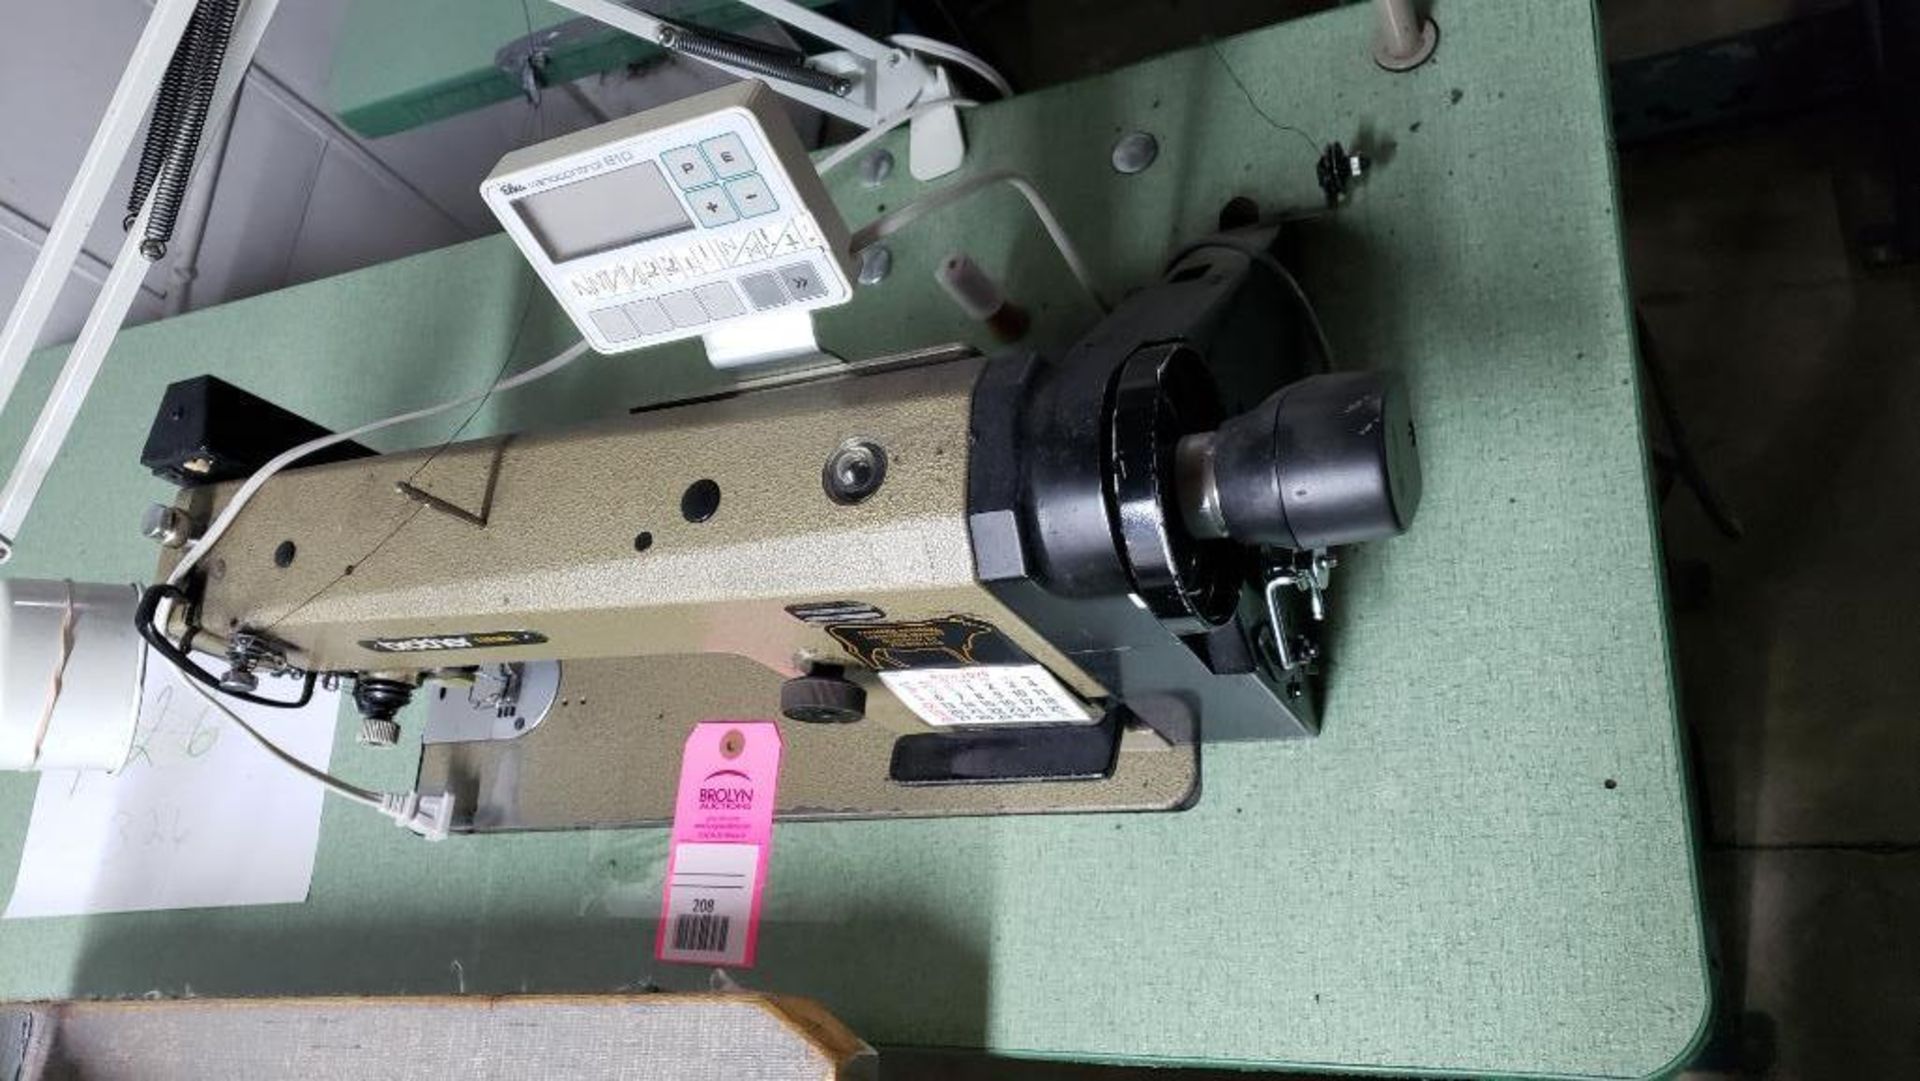 Brother industrial sewing machine. 3 ph 220-240v.